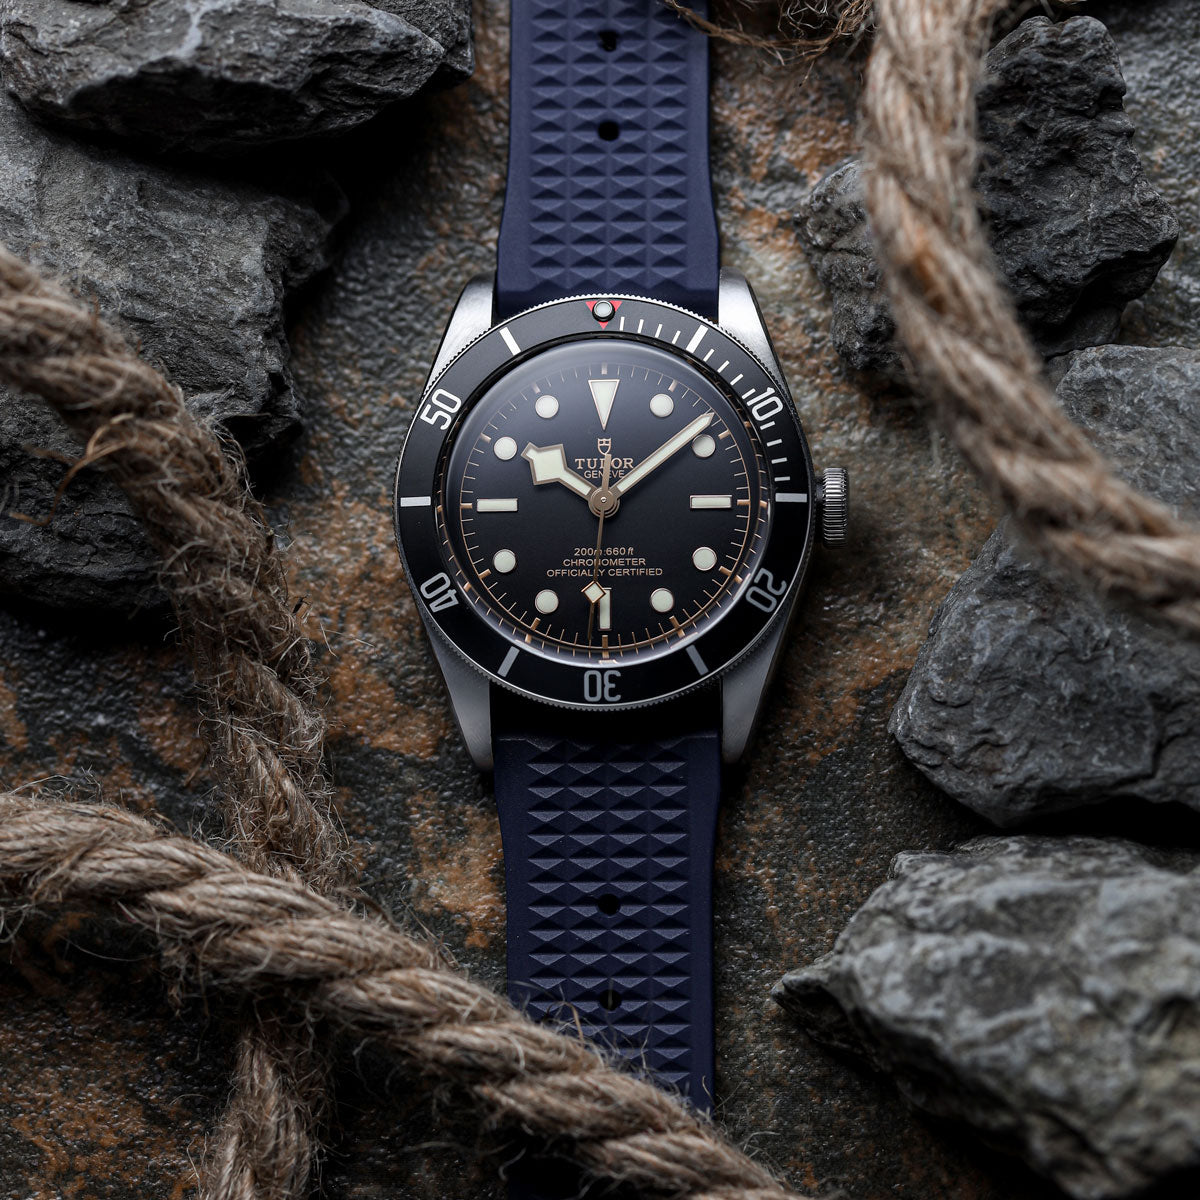 ZULUDIVER Seacroft Waffle FKM Rubber Dive Watch Strap (MkII) - Navy - additional image 1